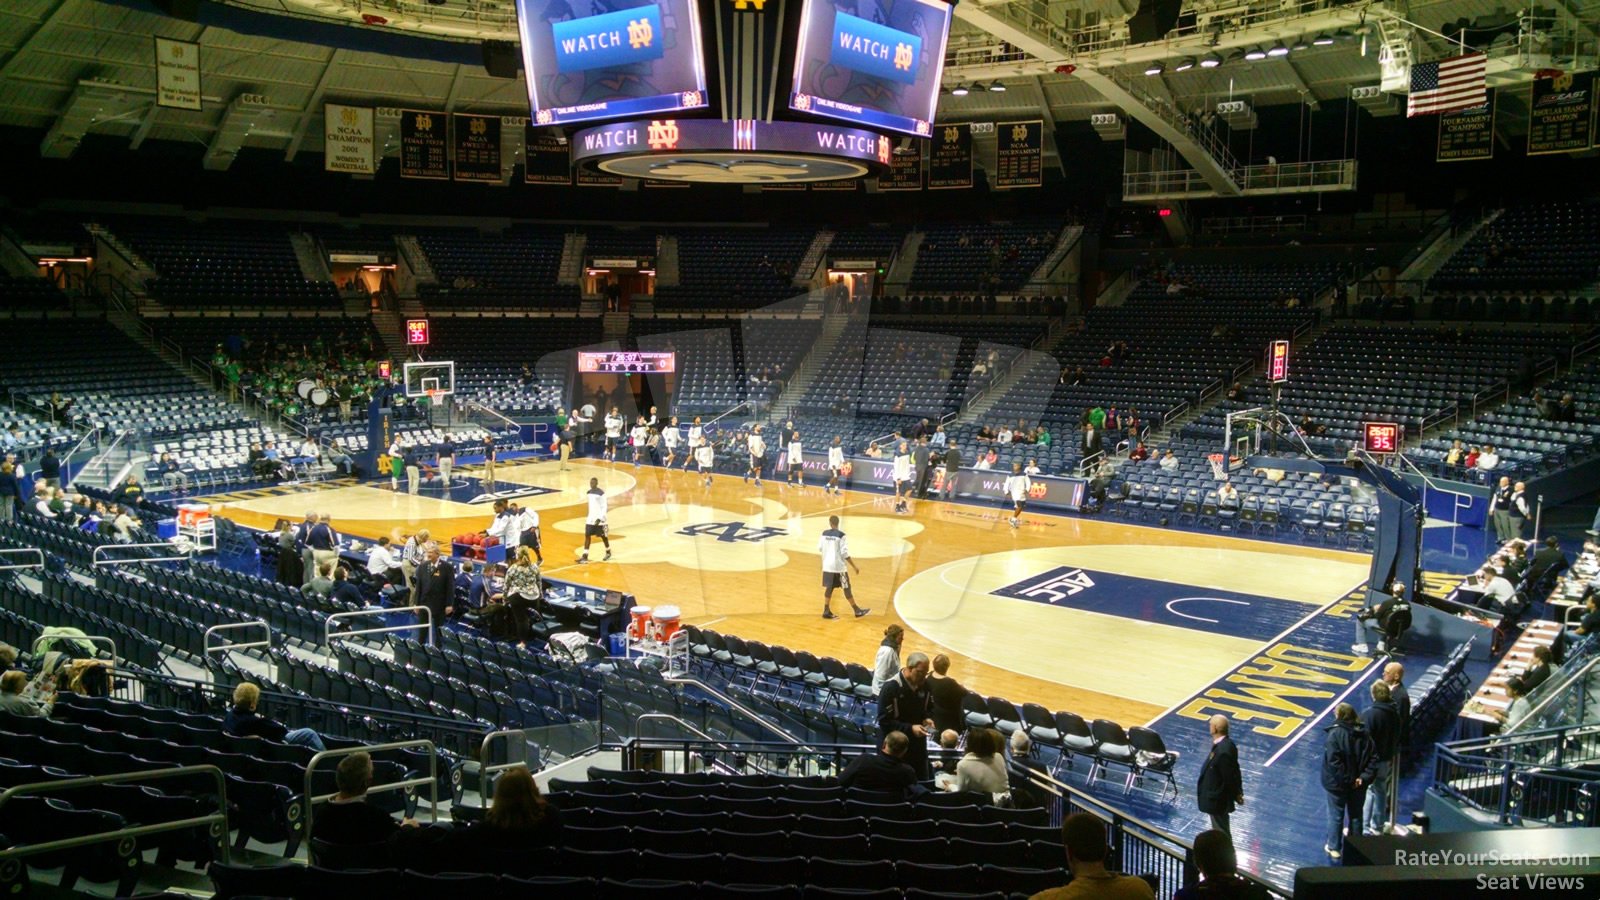 section 17, row 15 seat view  - joyce center